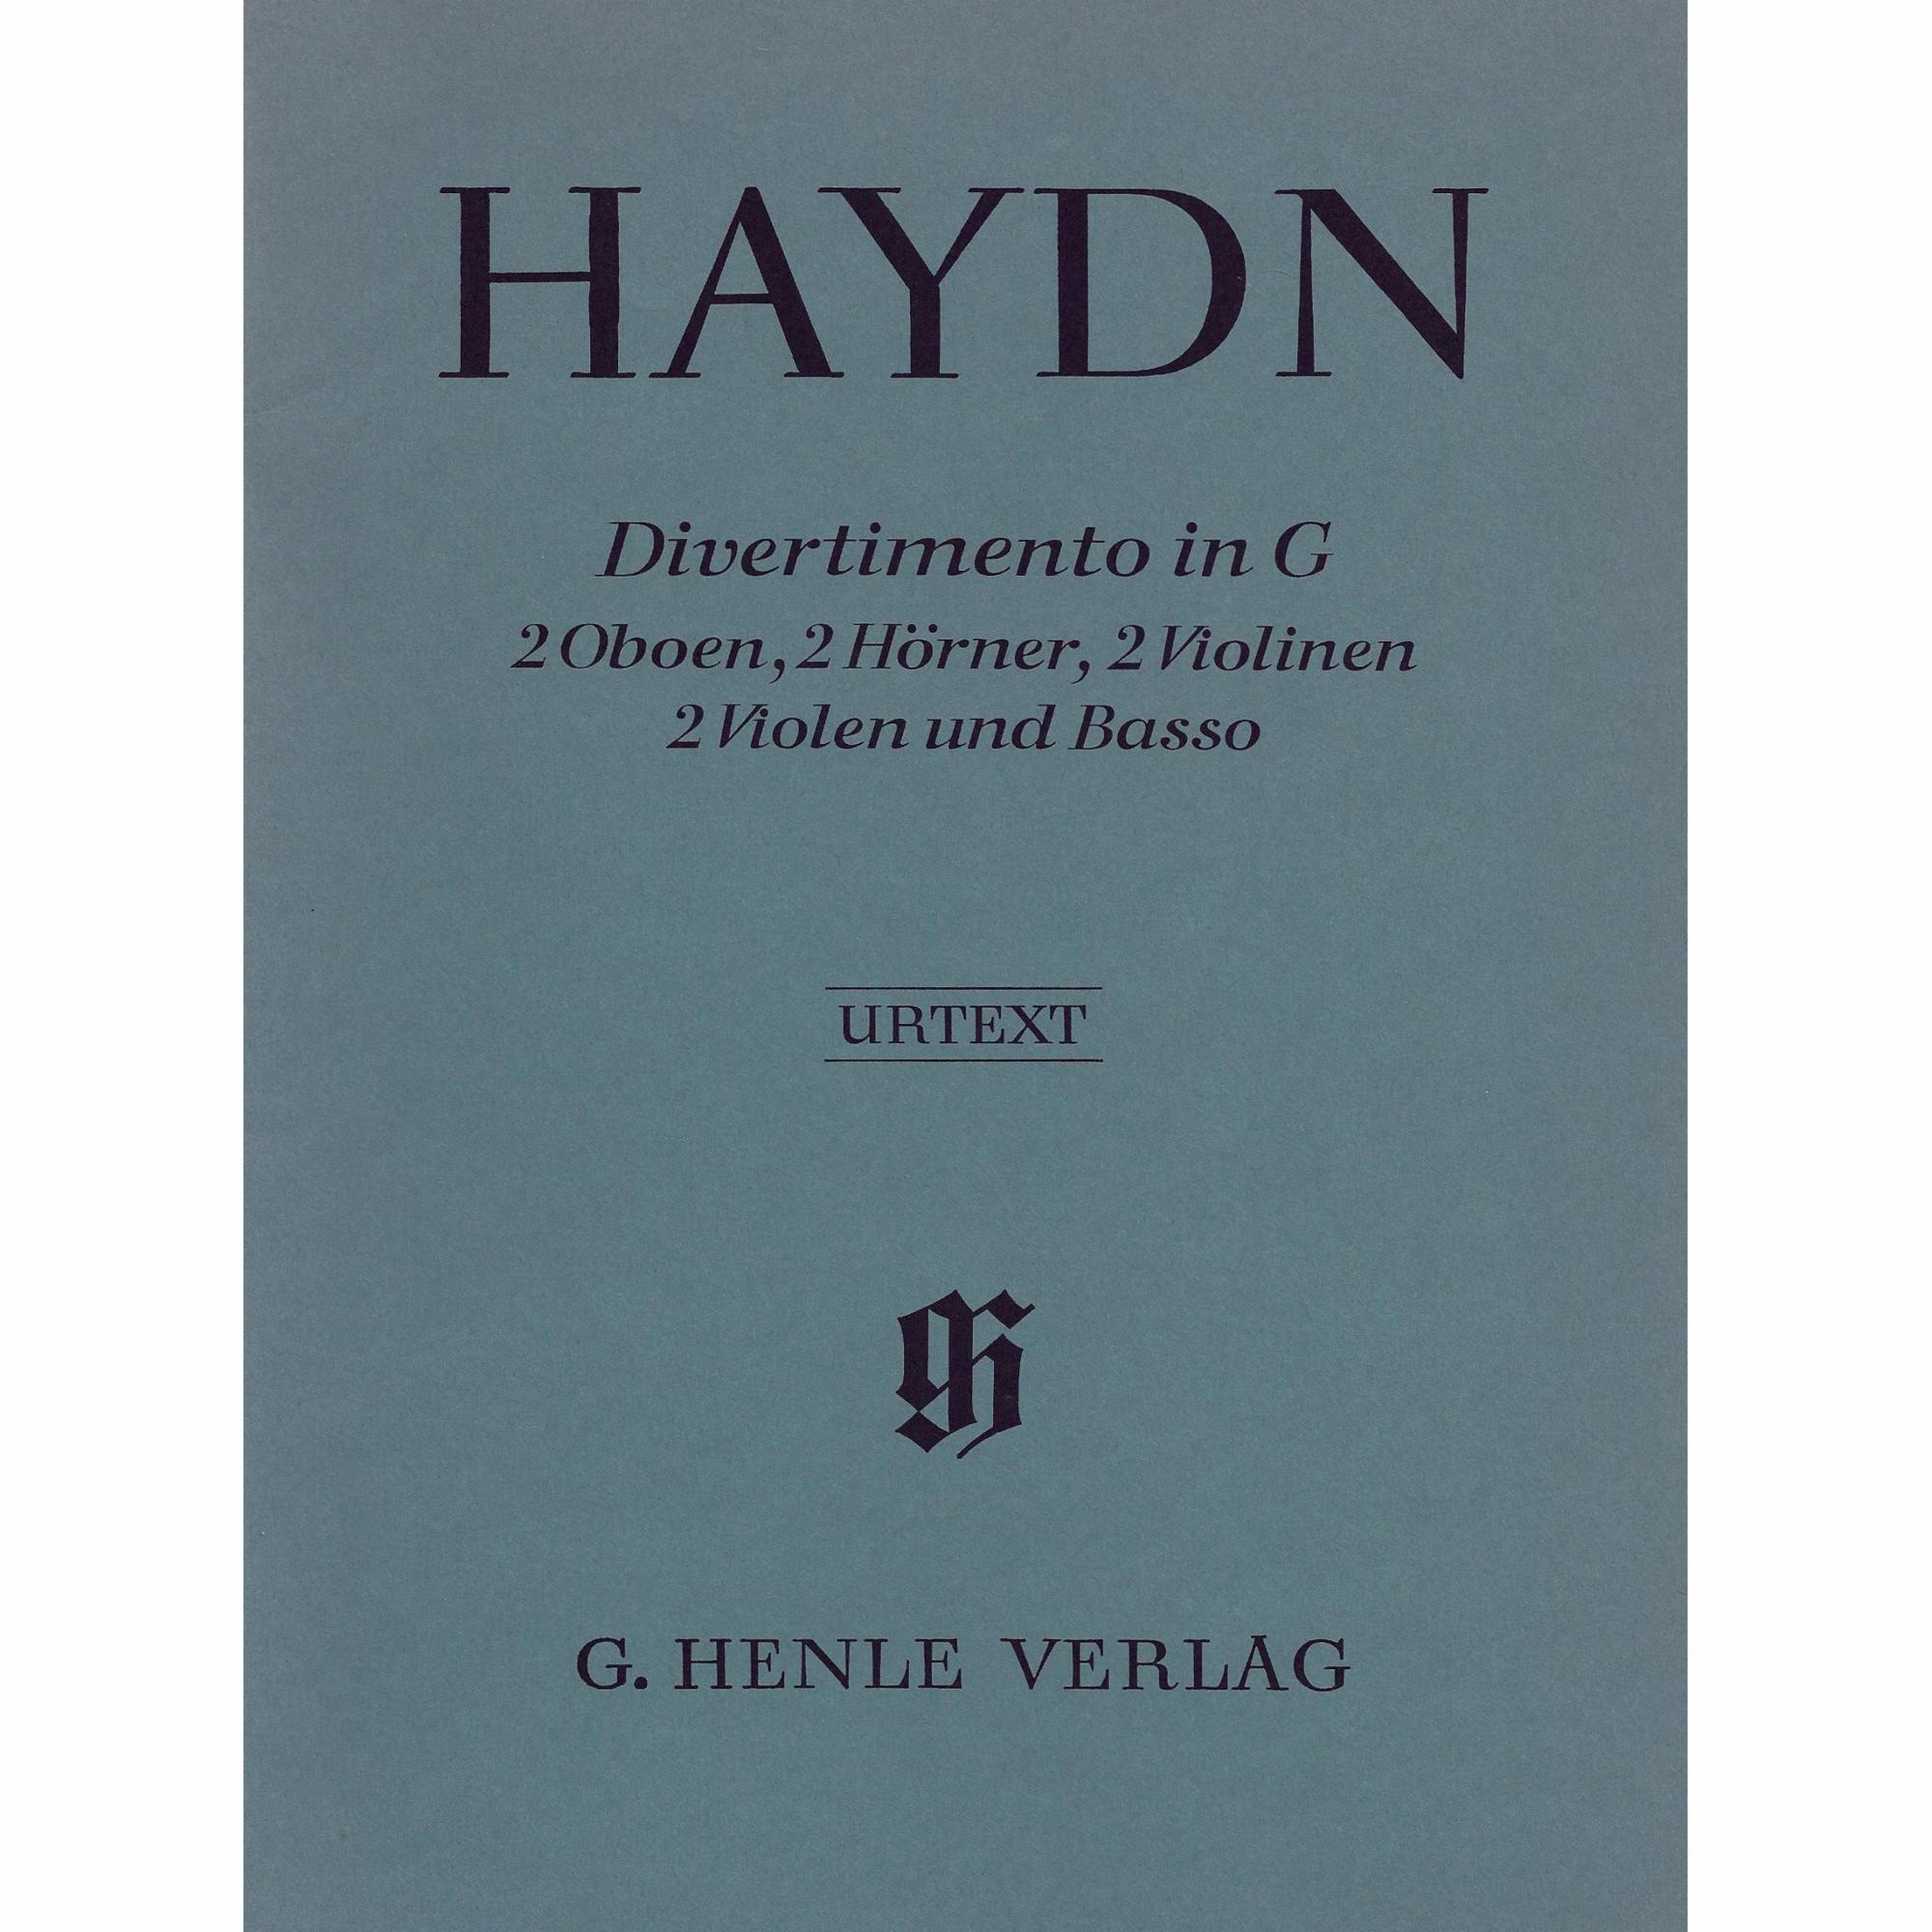 Haydn -- Divertimento in G Major, Hob. II:9 for Chamber Orchestra